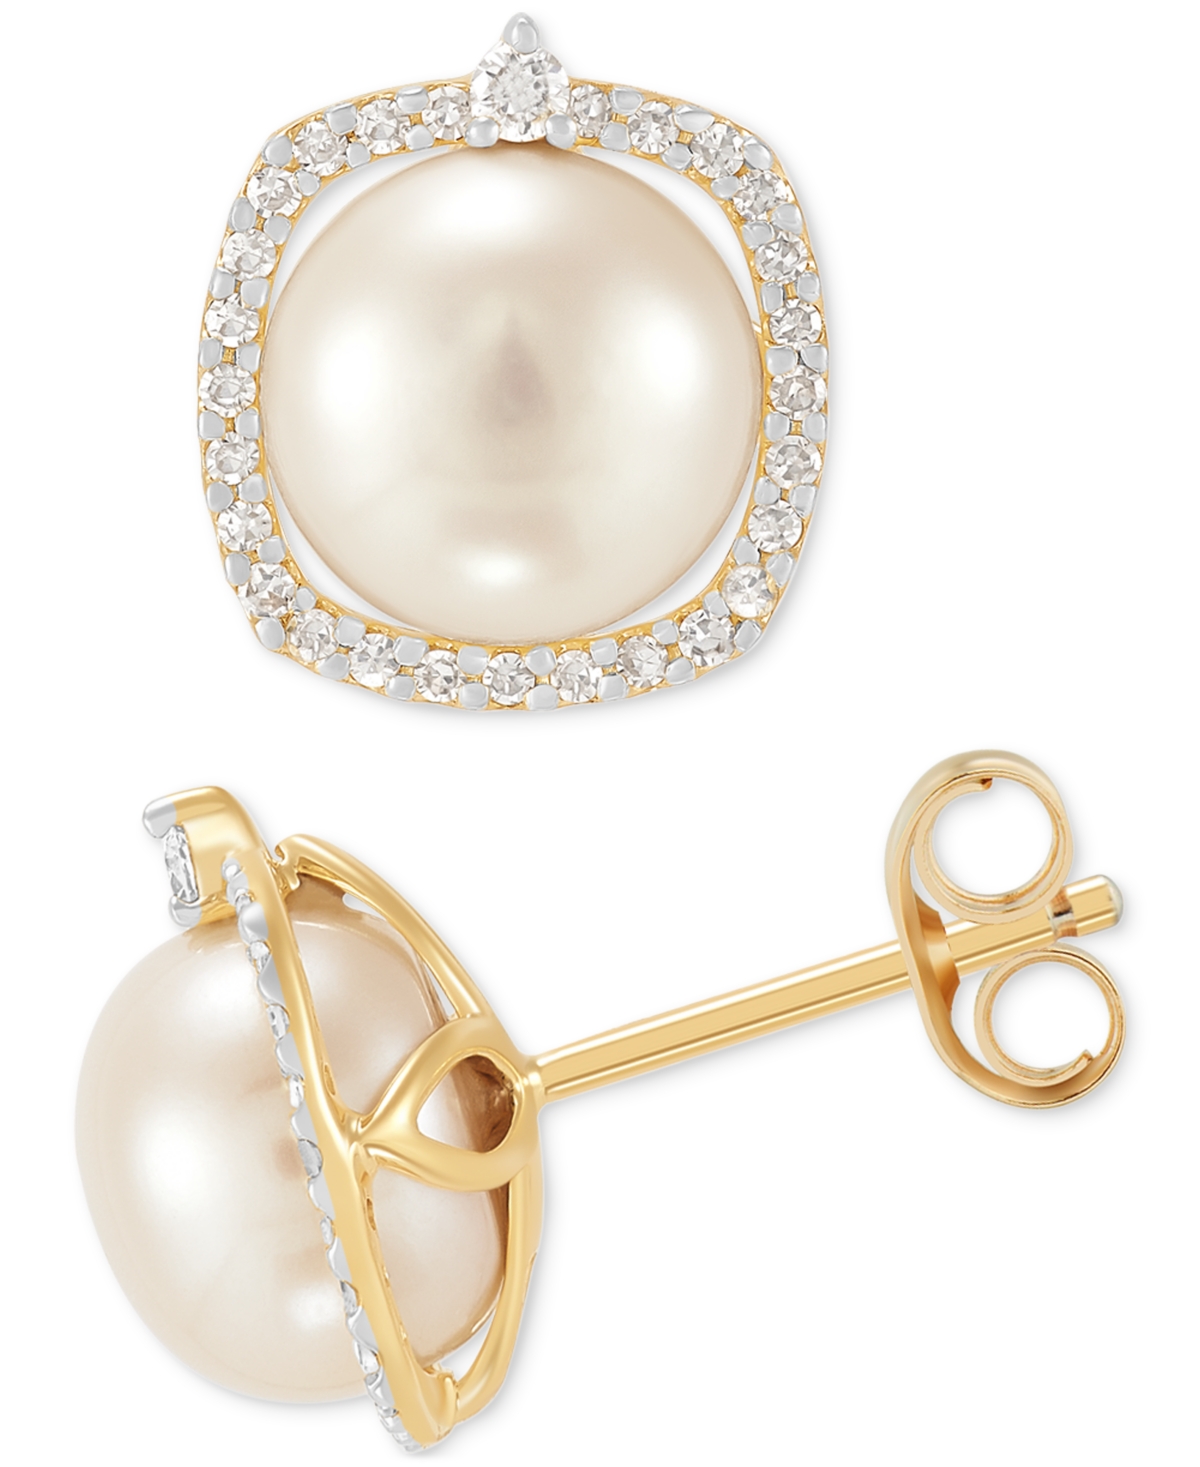 Cultured Freshwater Pearl (7mm) & Diamond (1/6 ct. t.w.) Halo Stud Earrings in 14k Gold - Yellow Gold